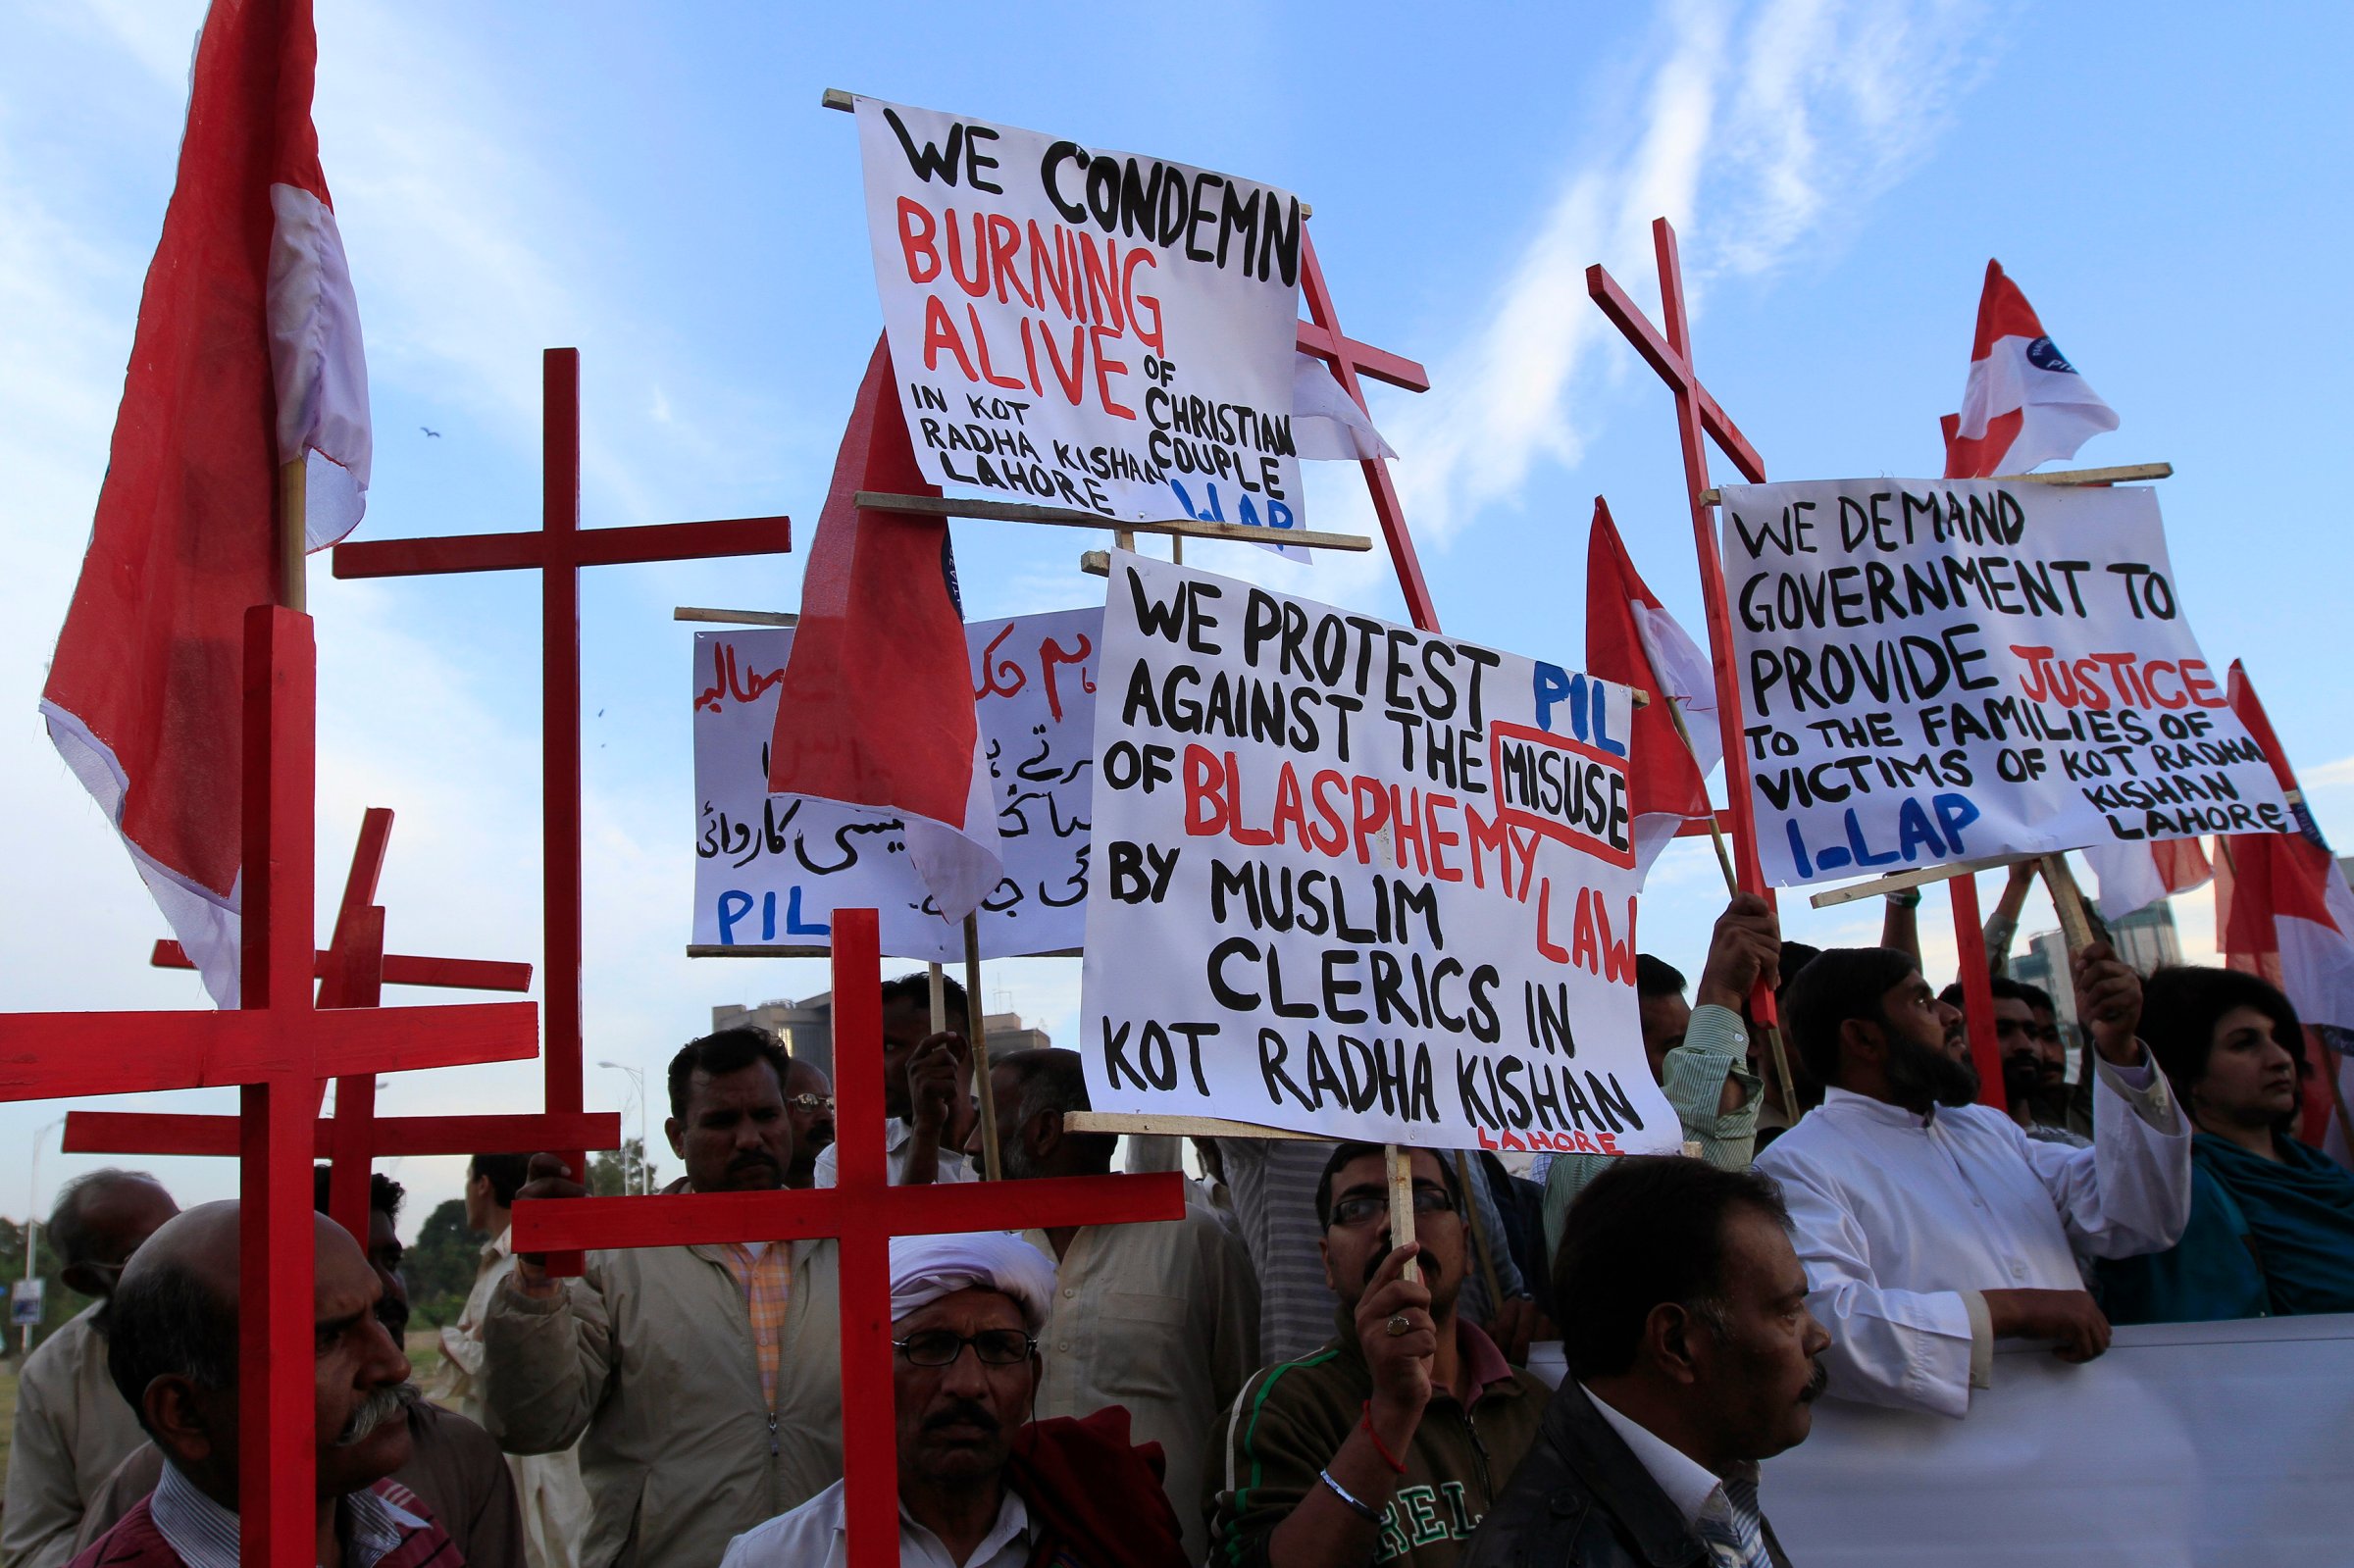 Members of the Pakistani Christian community hold placards and wooden crosses during a demonstration to condemn the death of a Christian couple in a village in Punjab province on Tuesday, in Islamabad